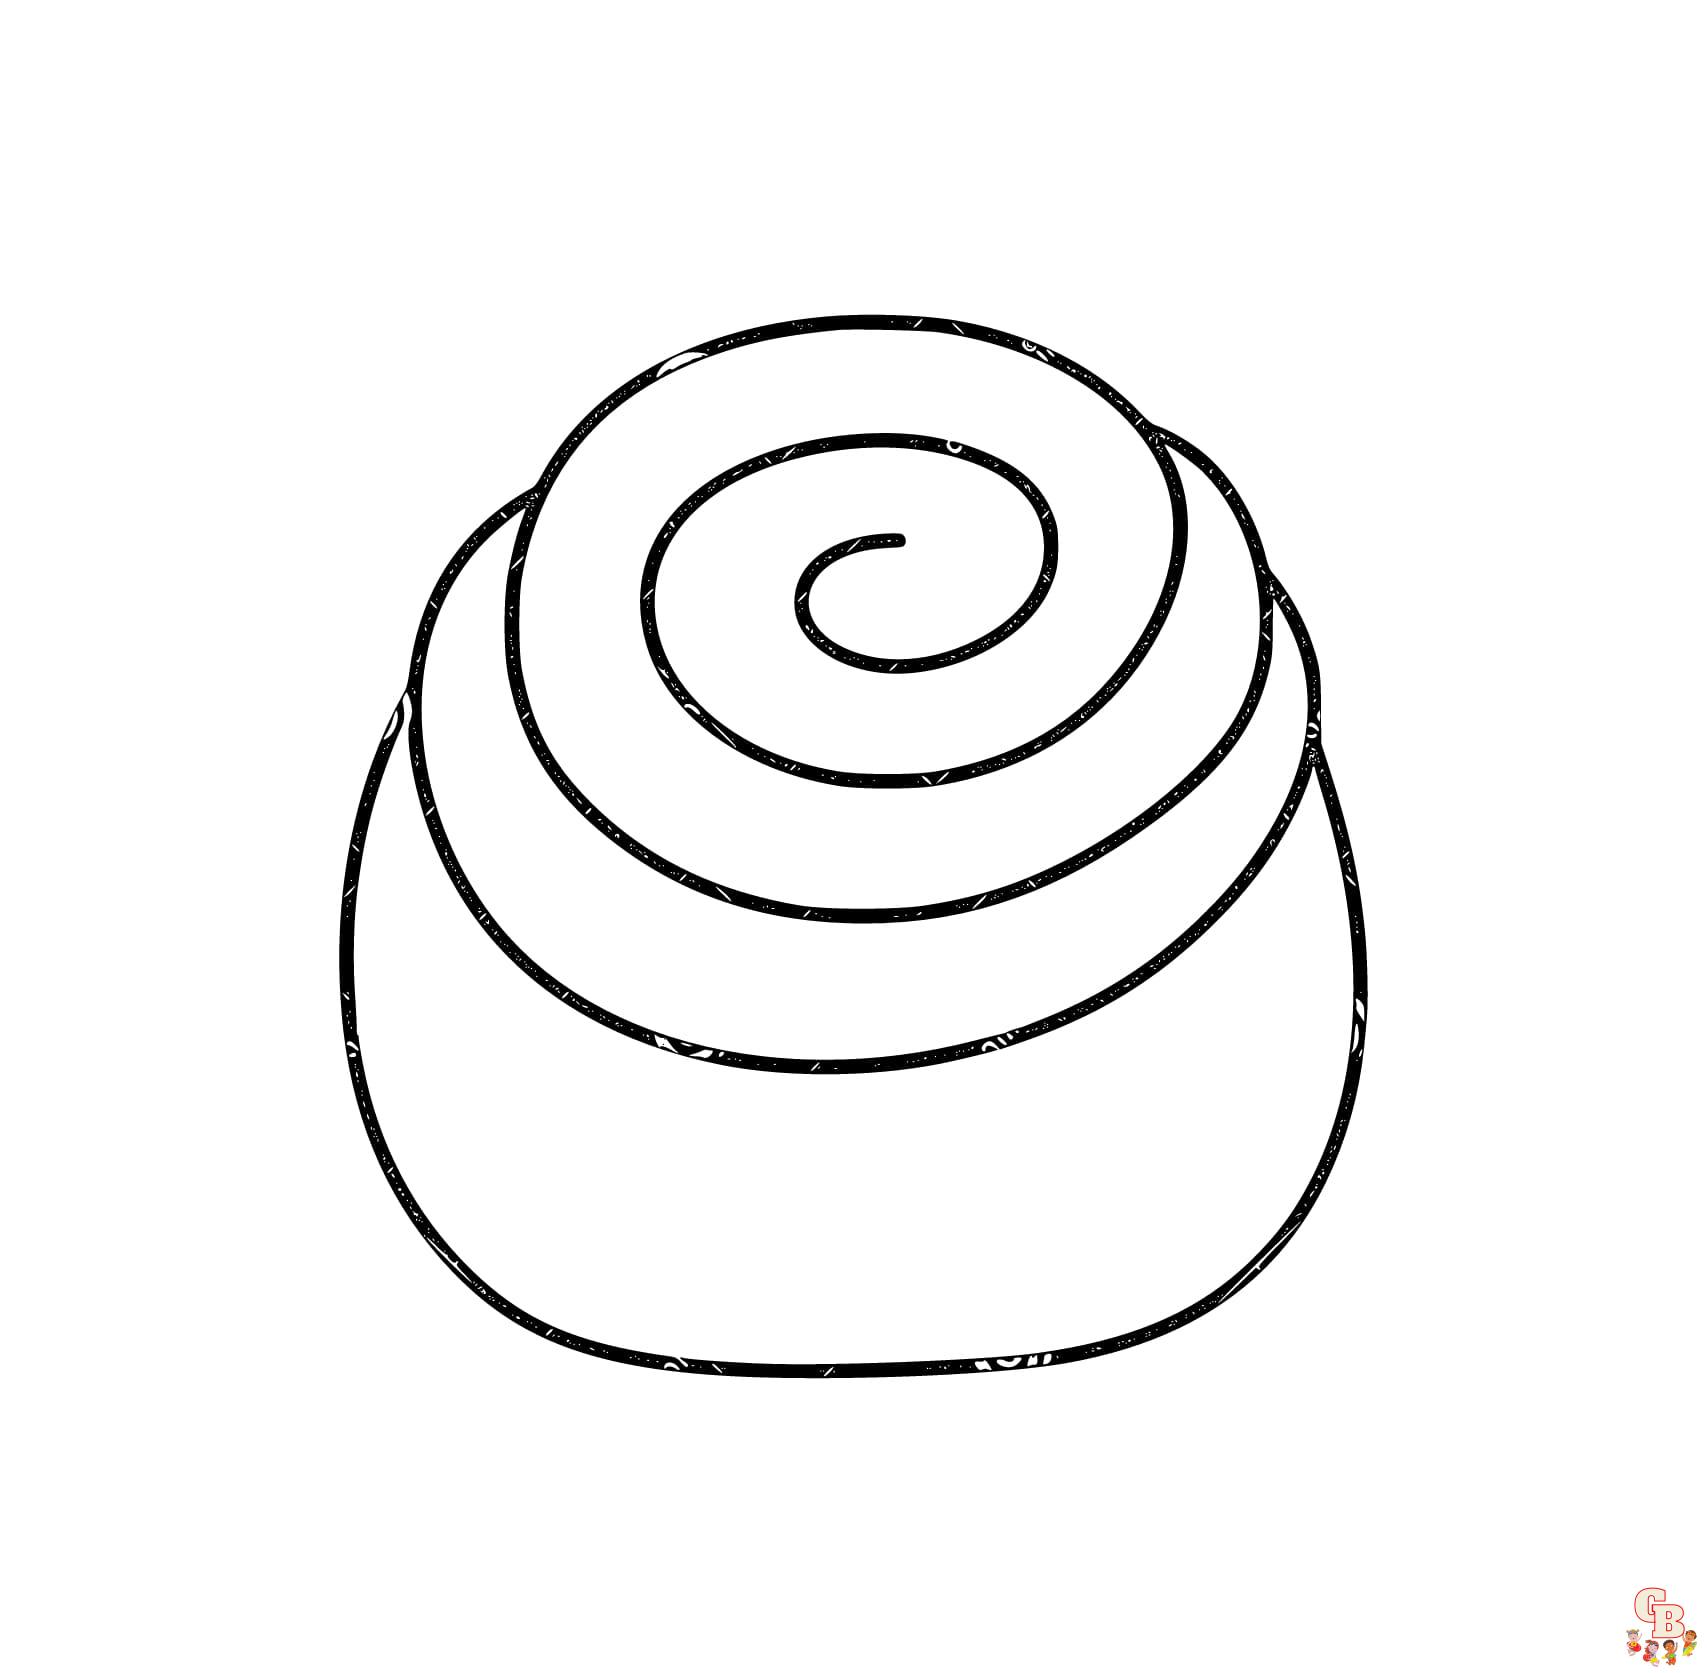 Cinnamon roll coloring pages free